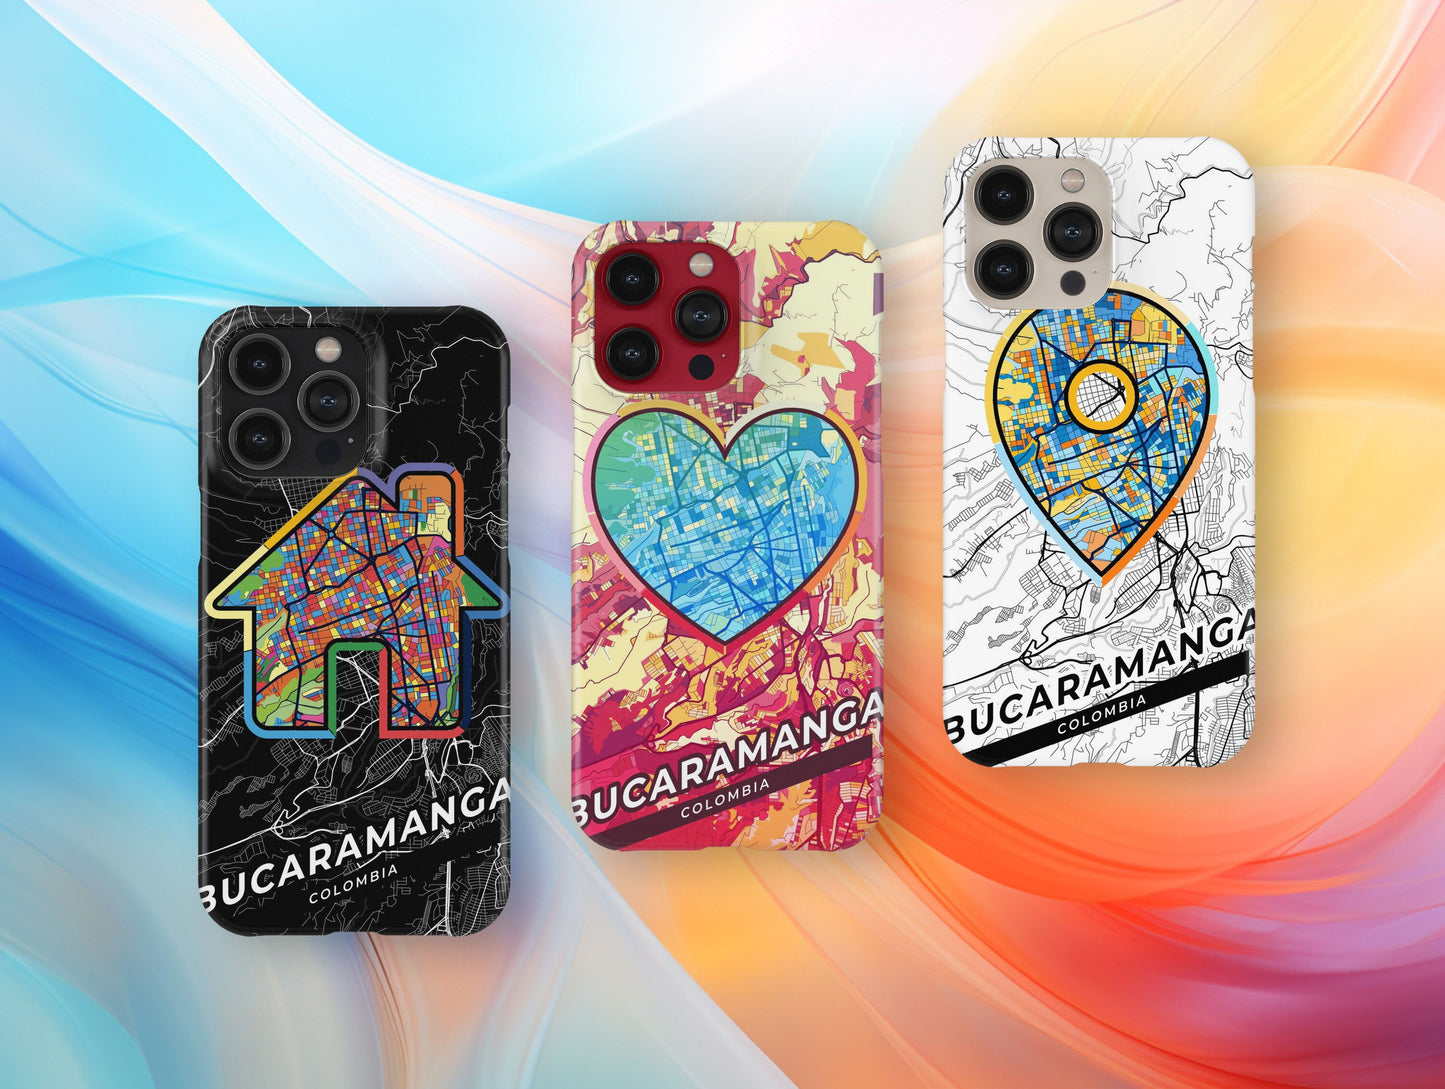 Bucaramanga Colombia slim phone case with colorful icon. Birthday, wedding or housewarming gift. Couple match cases.